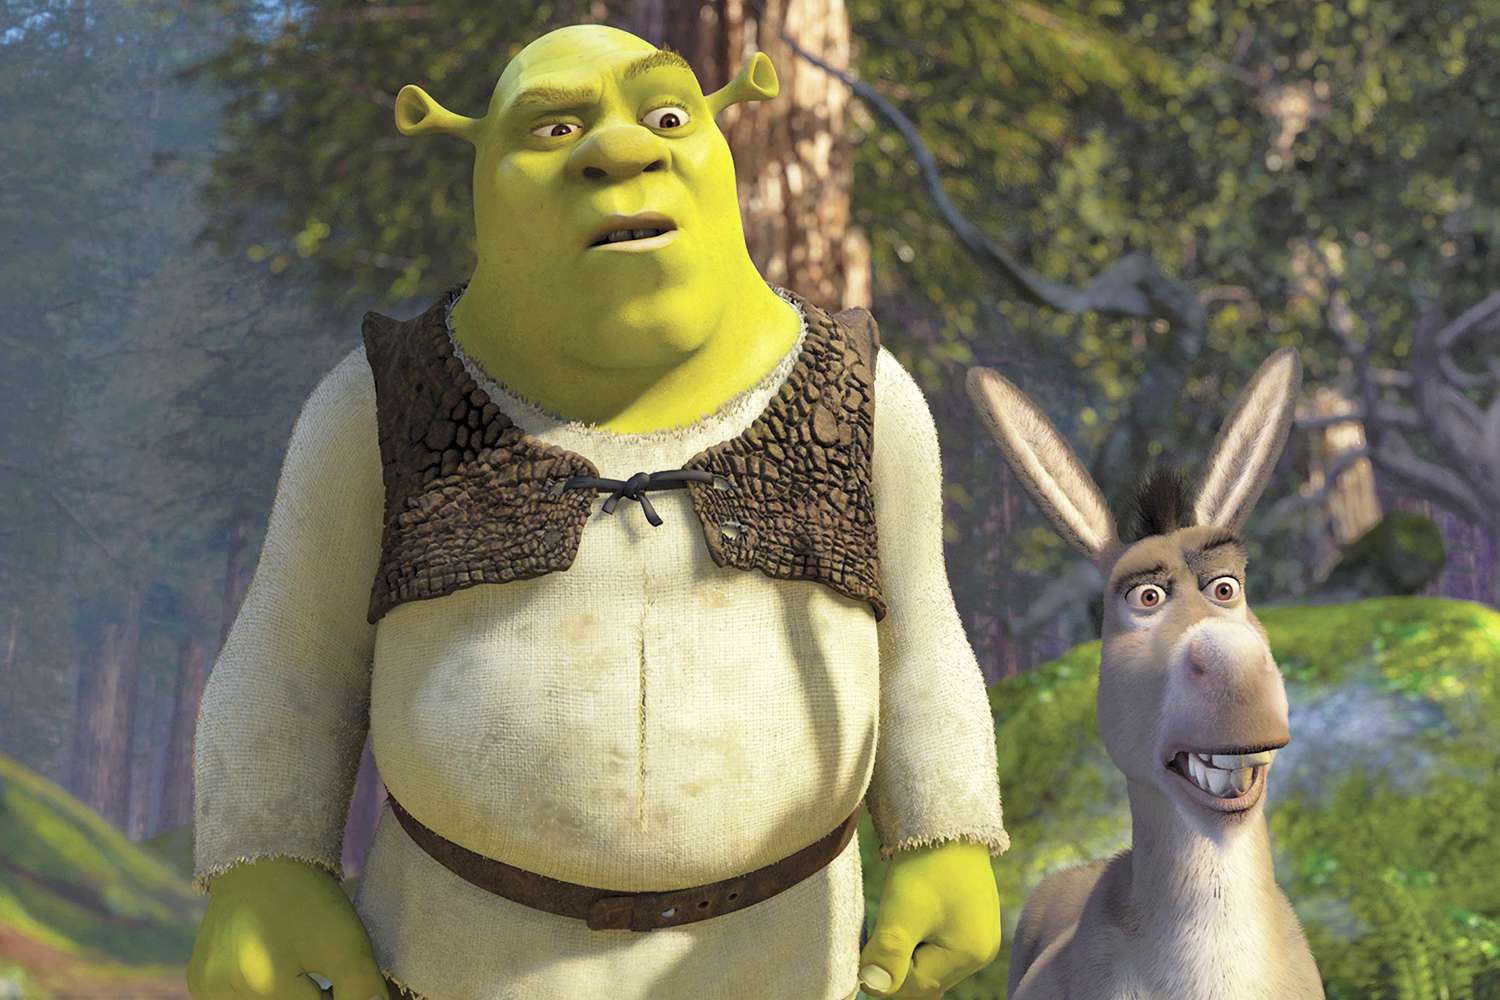 Shrek and Donkey Are Coming Back to the Swamp! Everything We Know About 'Shrek 5' So Far